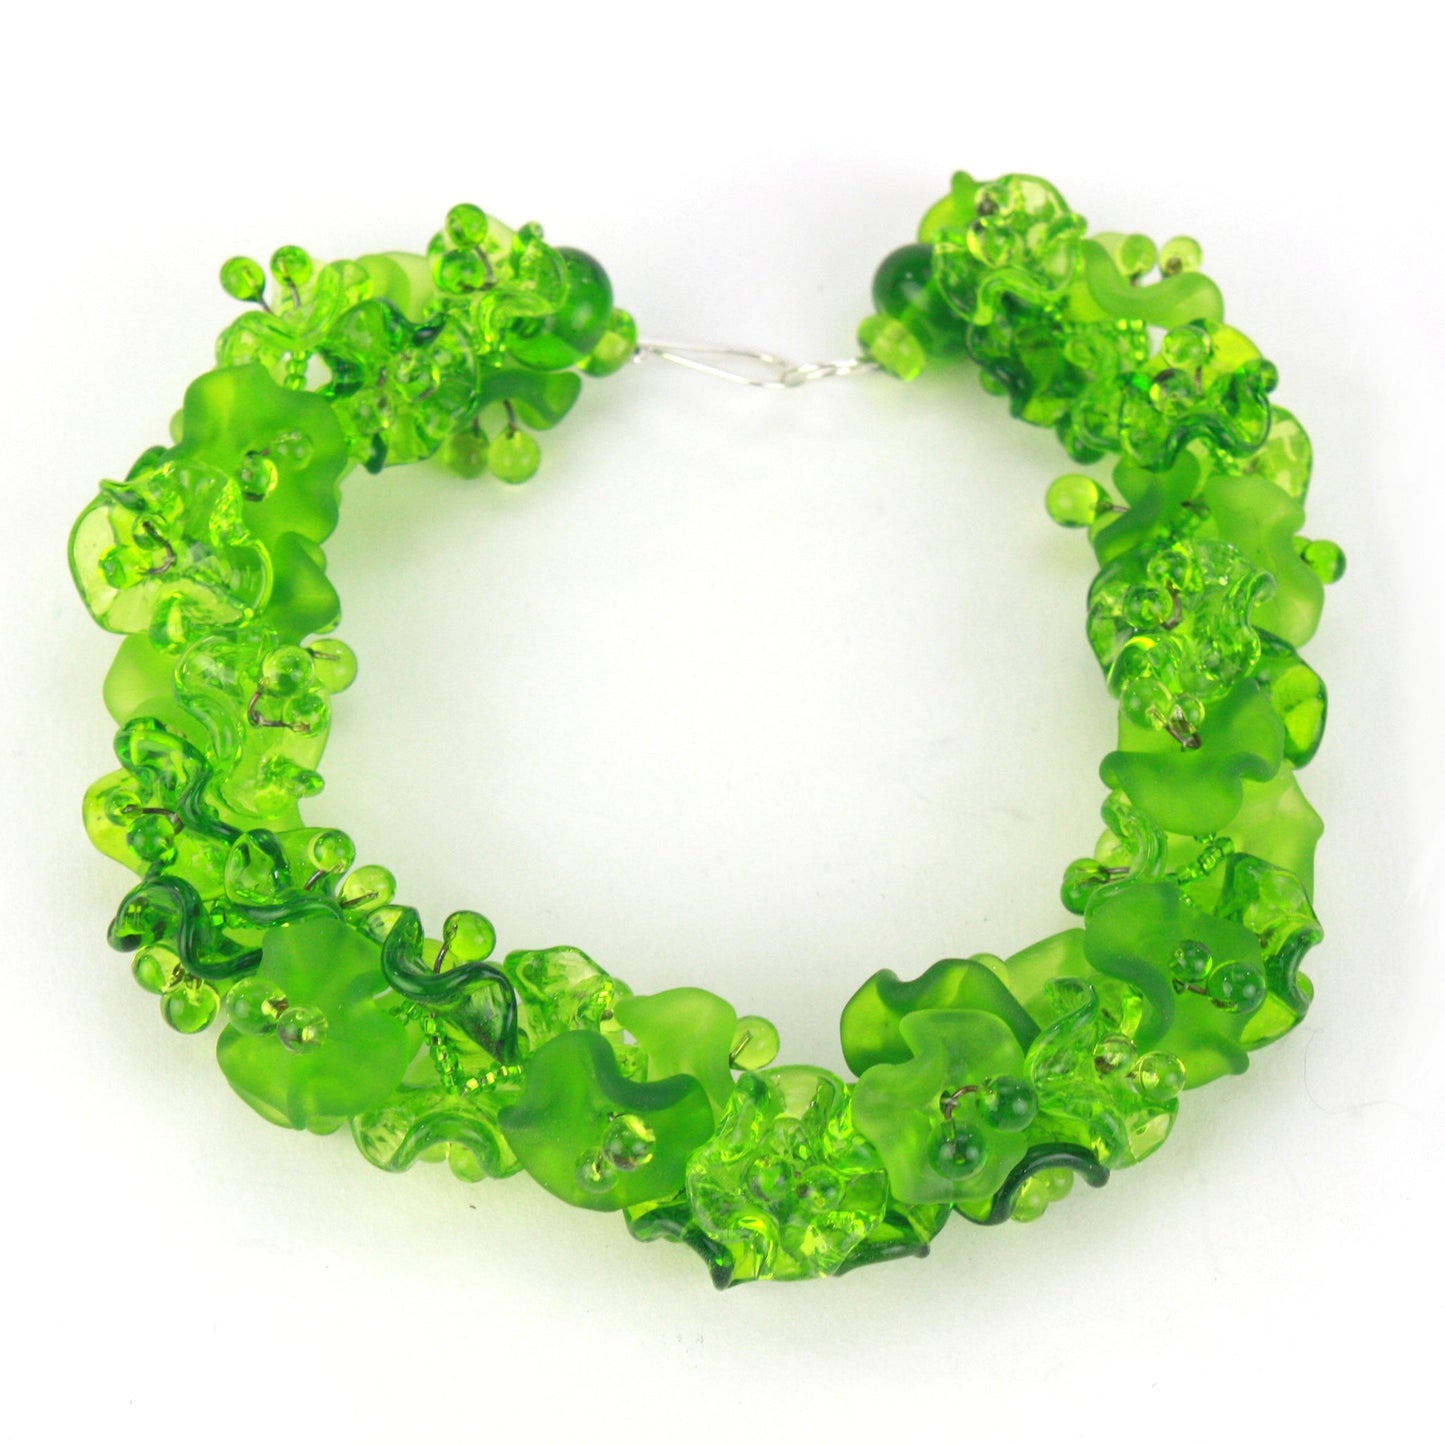 Florette necklace in green